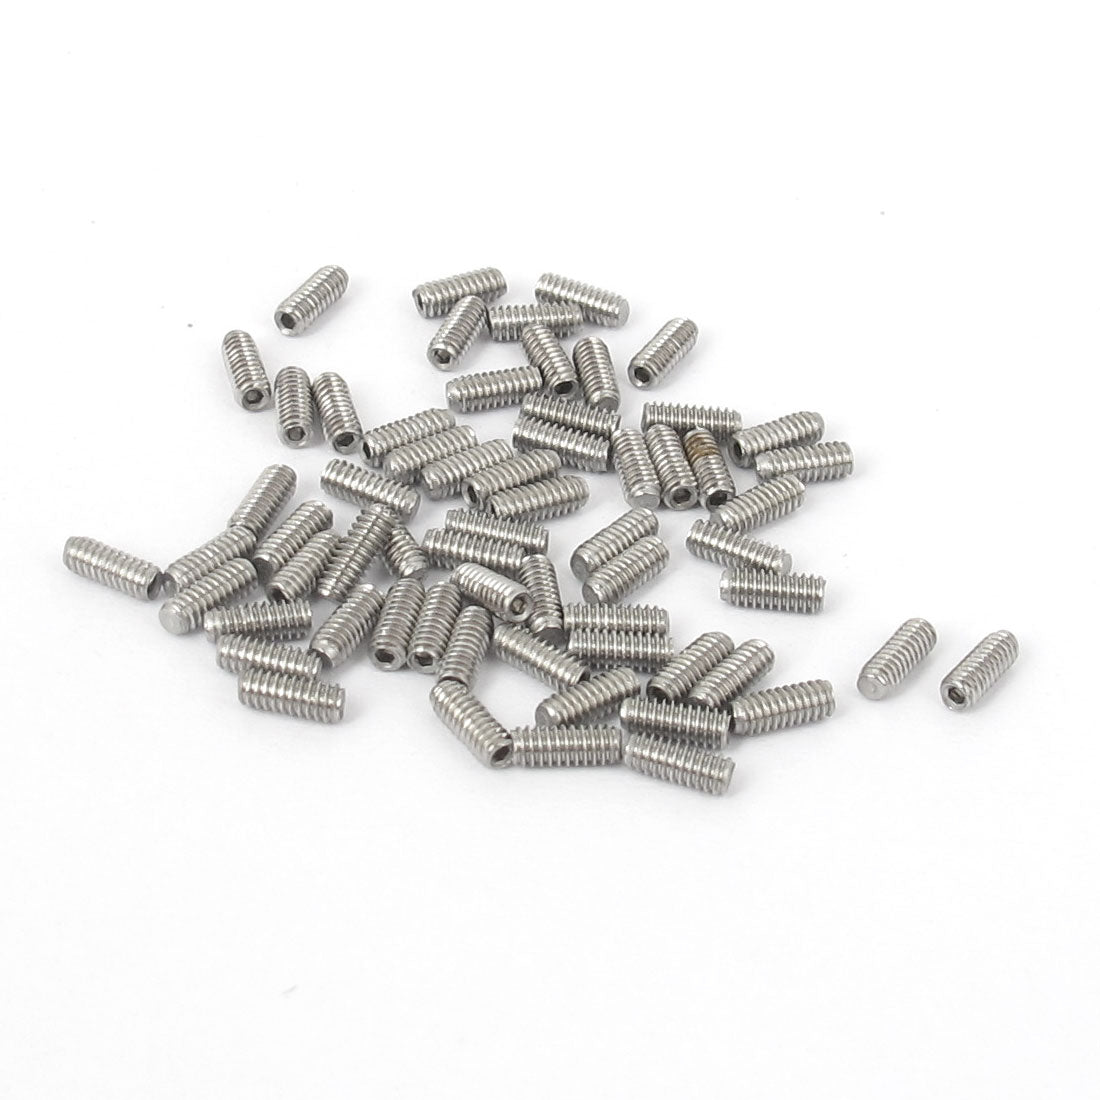 uxcell Uxcell M2x5mm Stainless Steel Hex Socket Set Cup Point Grub Screws Silver Tone 50pcs